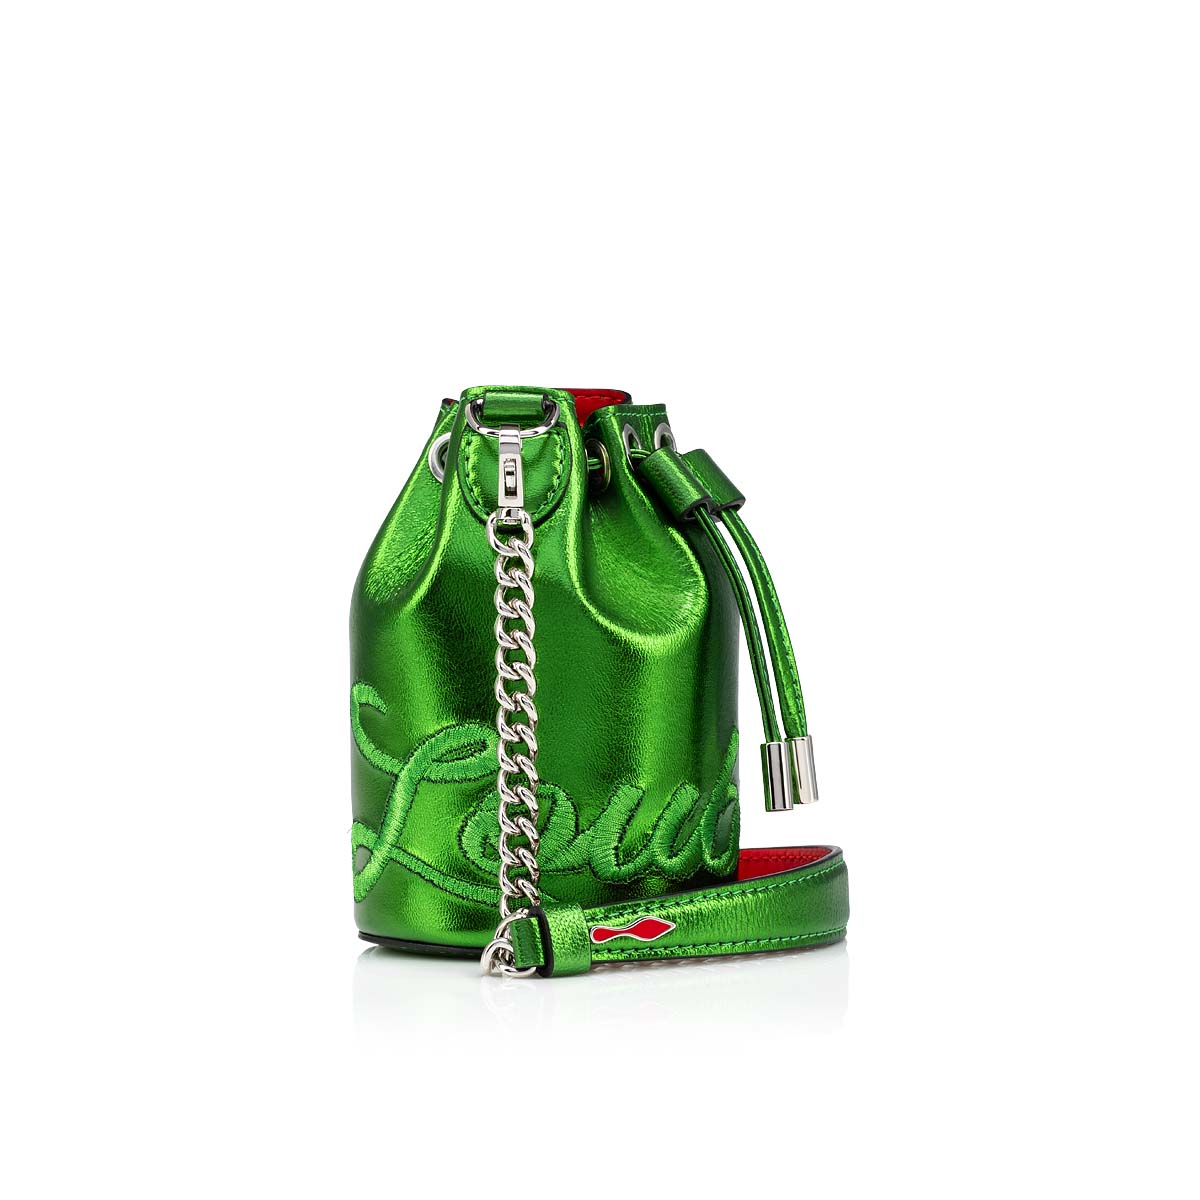 Marie Jane bucket mini SPINACH/SPINACH Leather - Accessories 